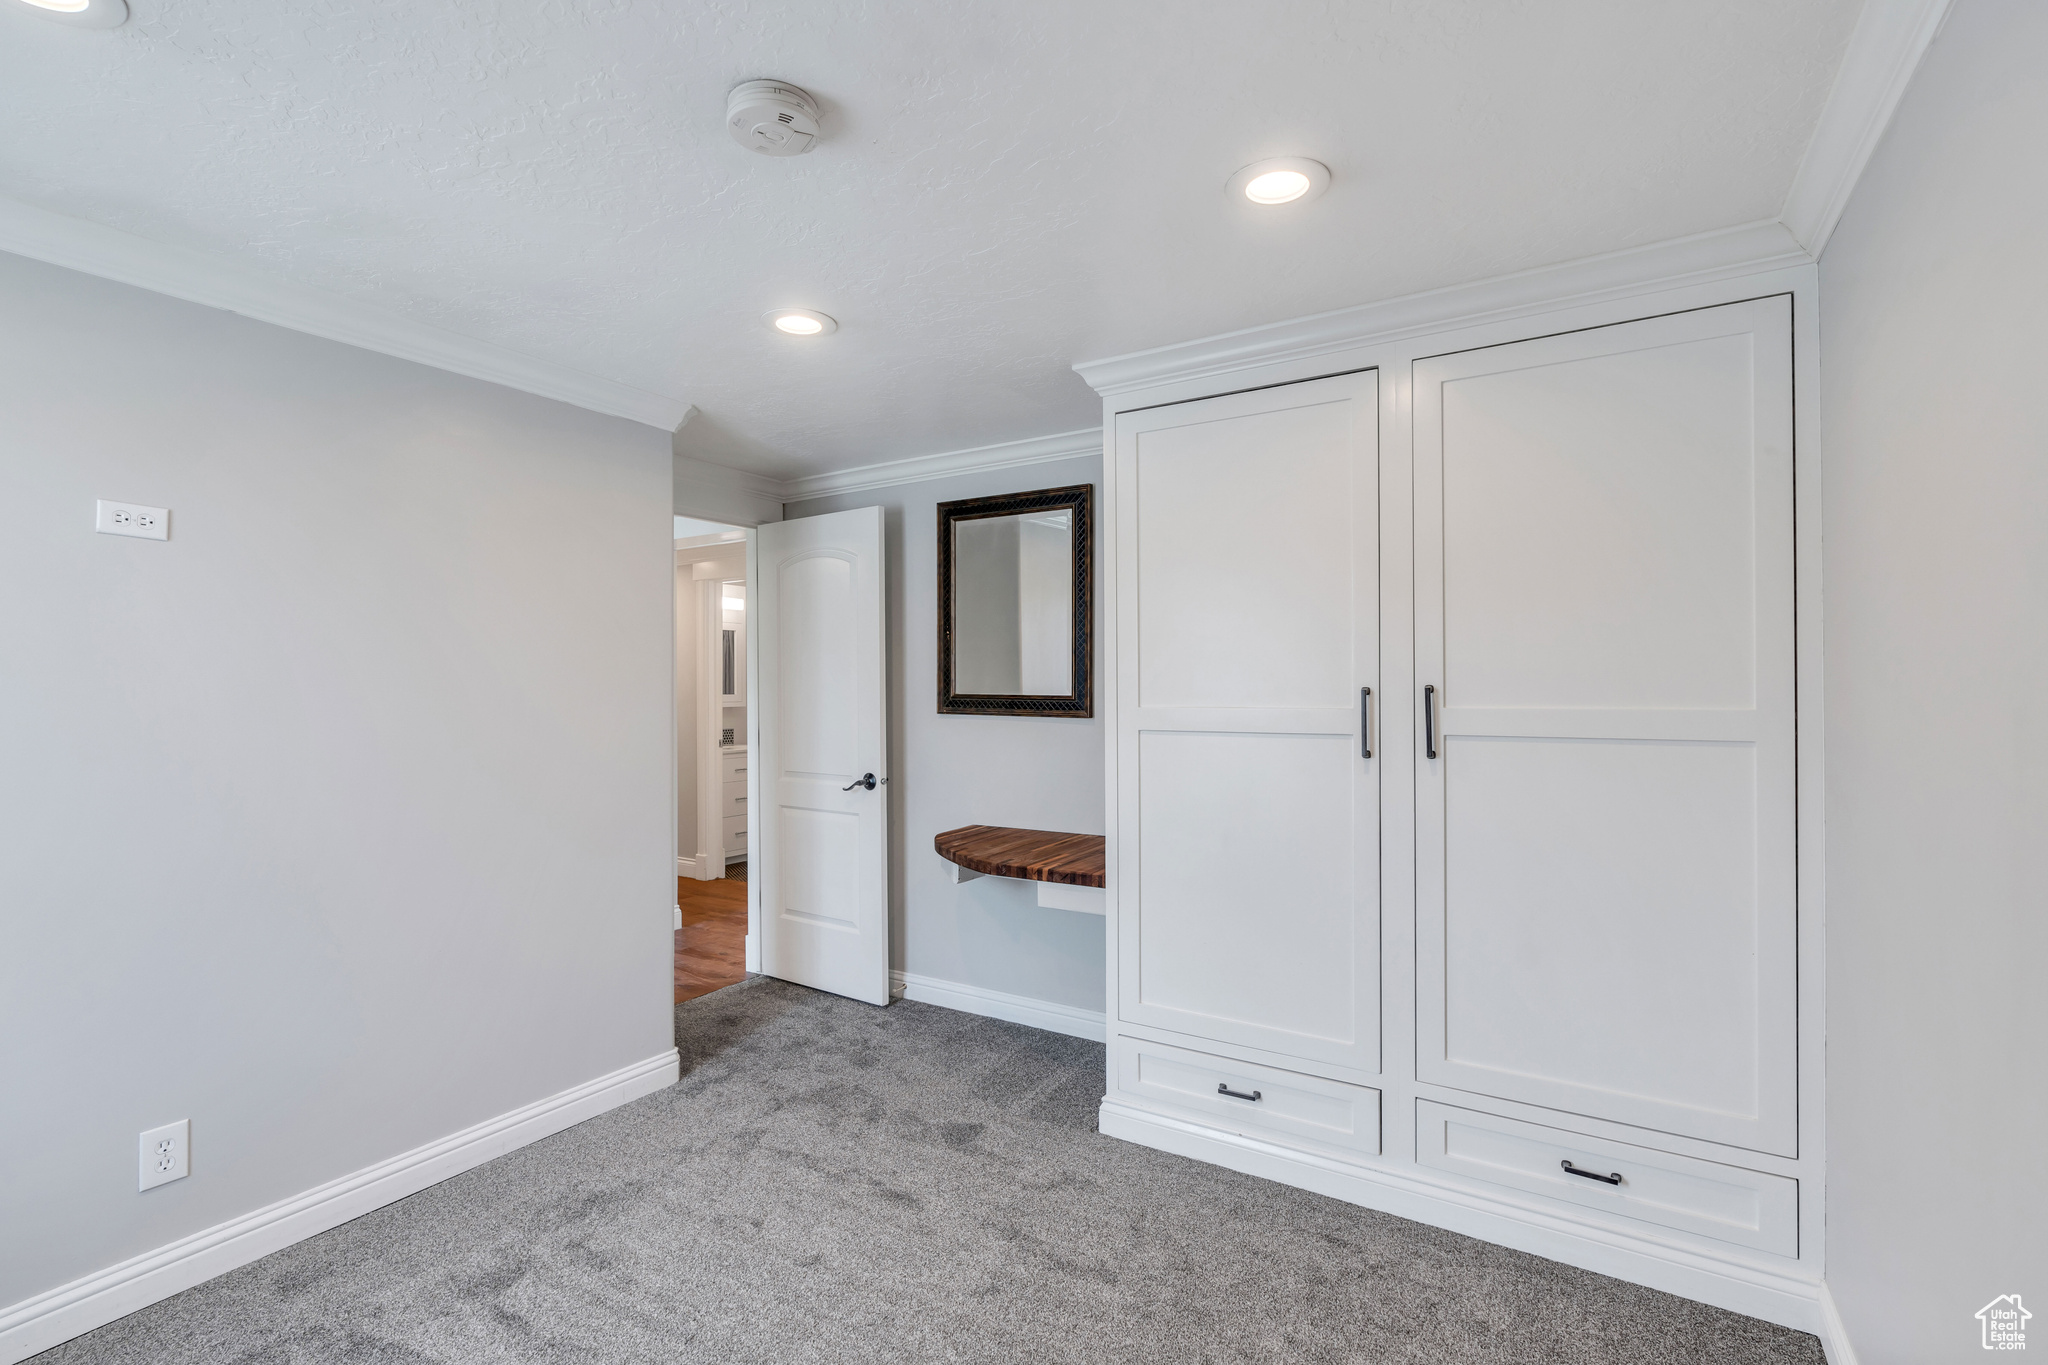 Unfurnished bedroom featuring carpet floors and crown molding